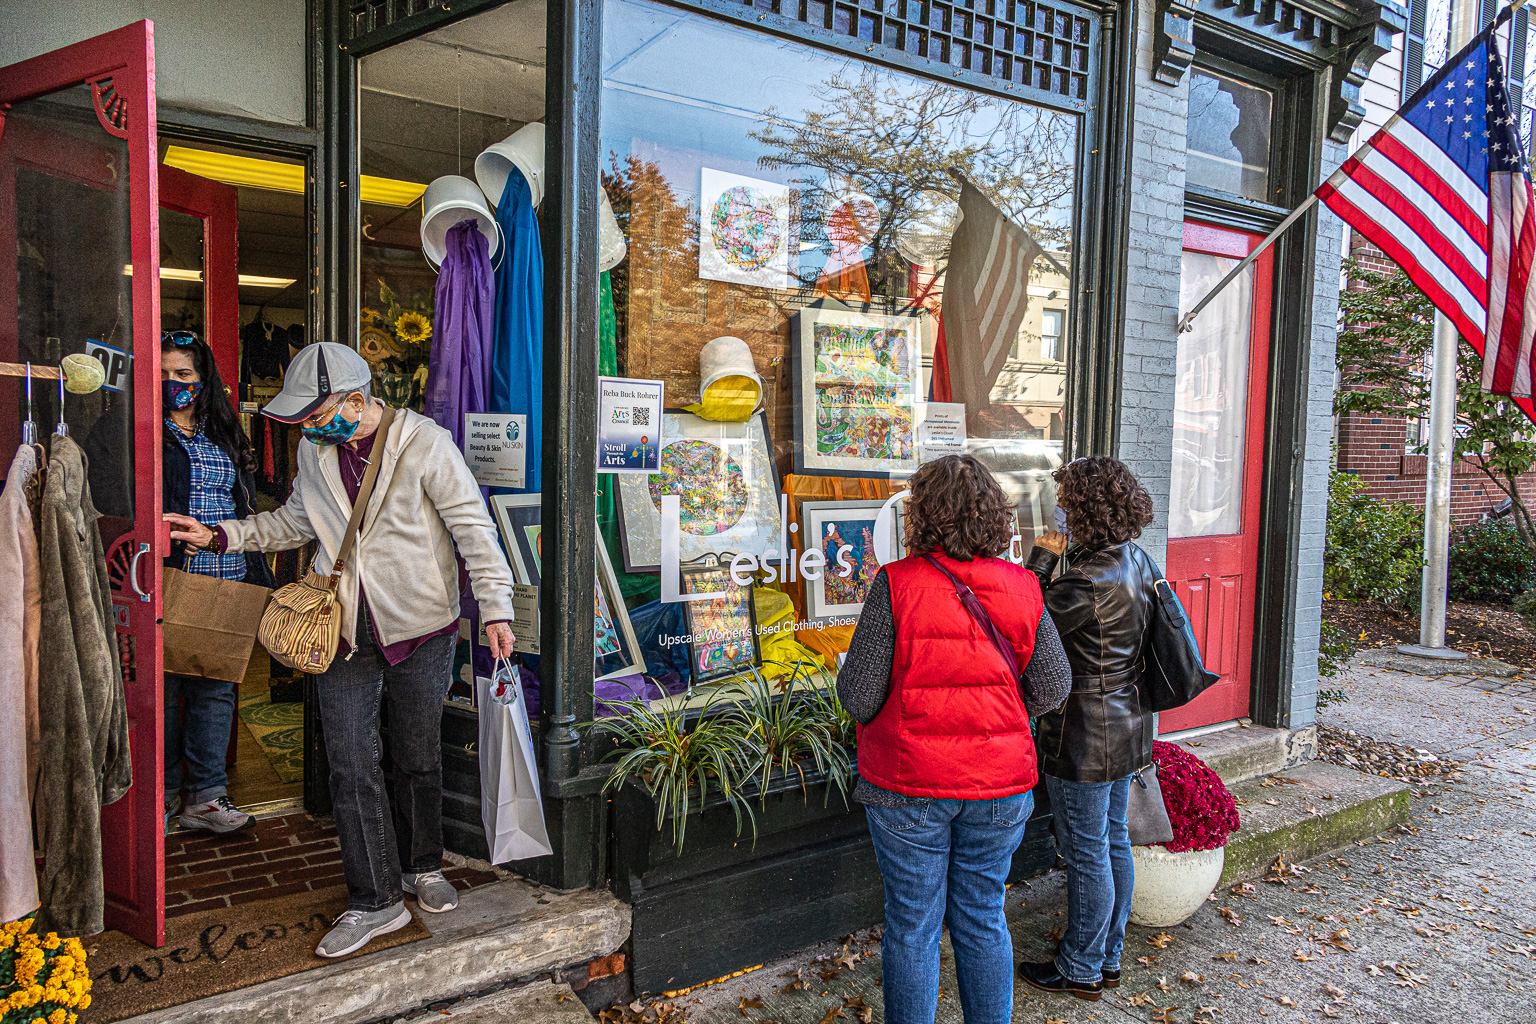 Patrons looking into store window while strolling through the arts downtown Lewisburg, PA